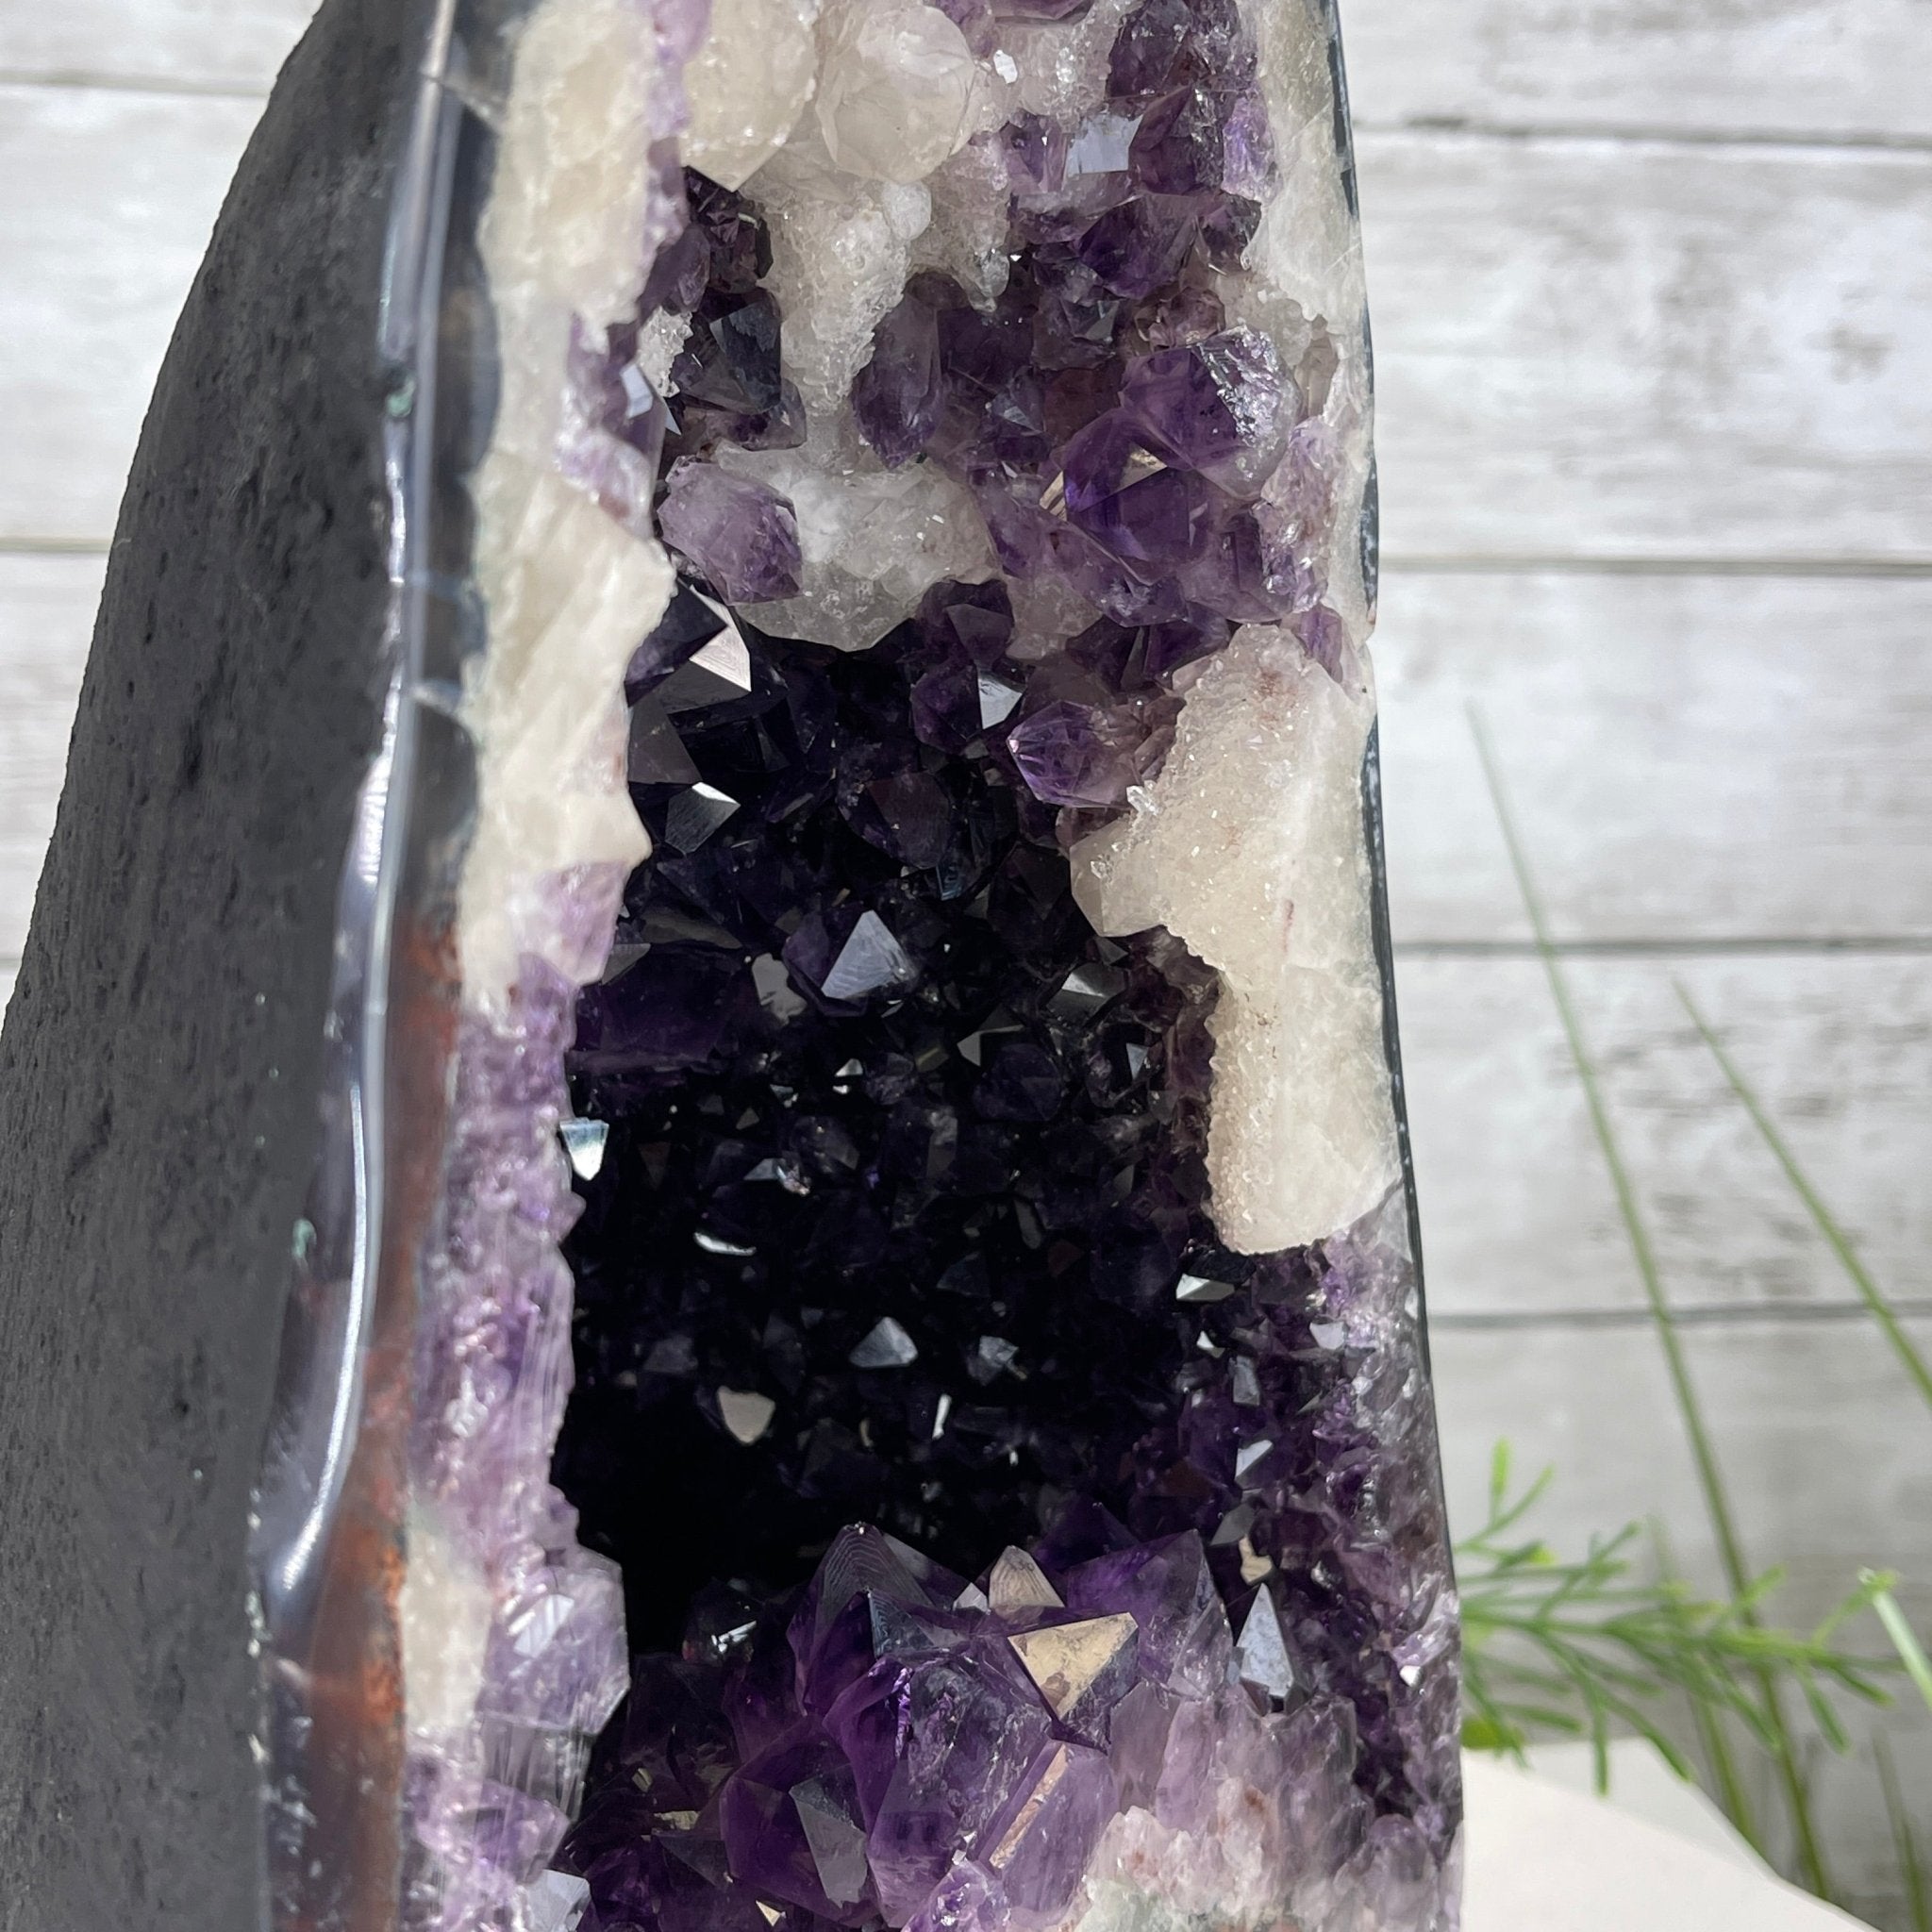 Super Quality Brazilian Amethyst Cathedral, 13 lbs & 10.8" Tall #5601-1111 by Brazil Gems - Brazil GemsBrazil GemsSuper Quality Brazilian Amethyst Cathedral, 13 lbs & 10.8" Tall #5601-1111 by Brazil GemsCathedrals5601-1111